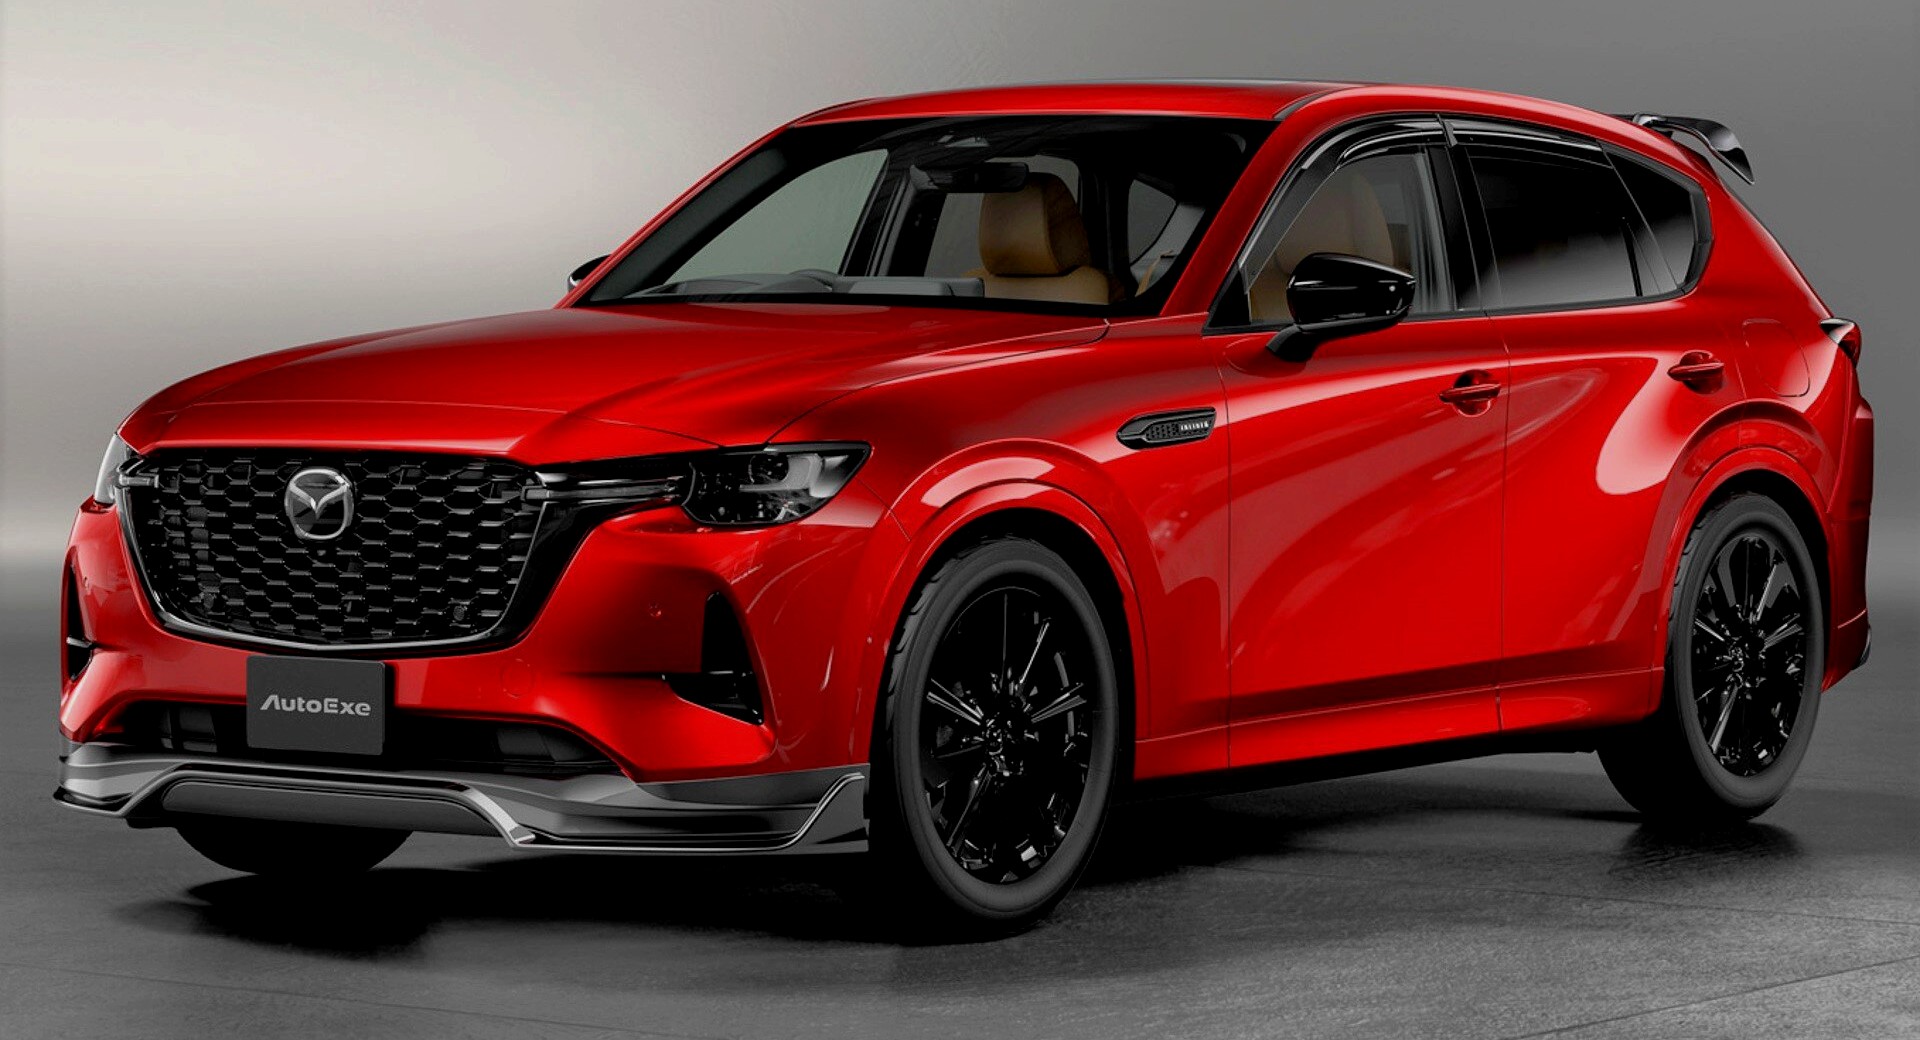 https://www.carscoops.com/wp-content/uploads/2022/06/Mazda-CX-60-tuned-by-AutoExe-front.jpg